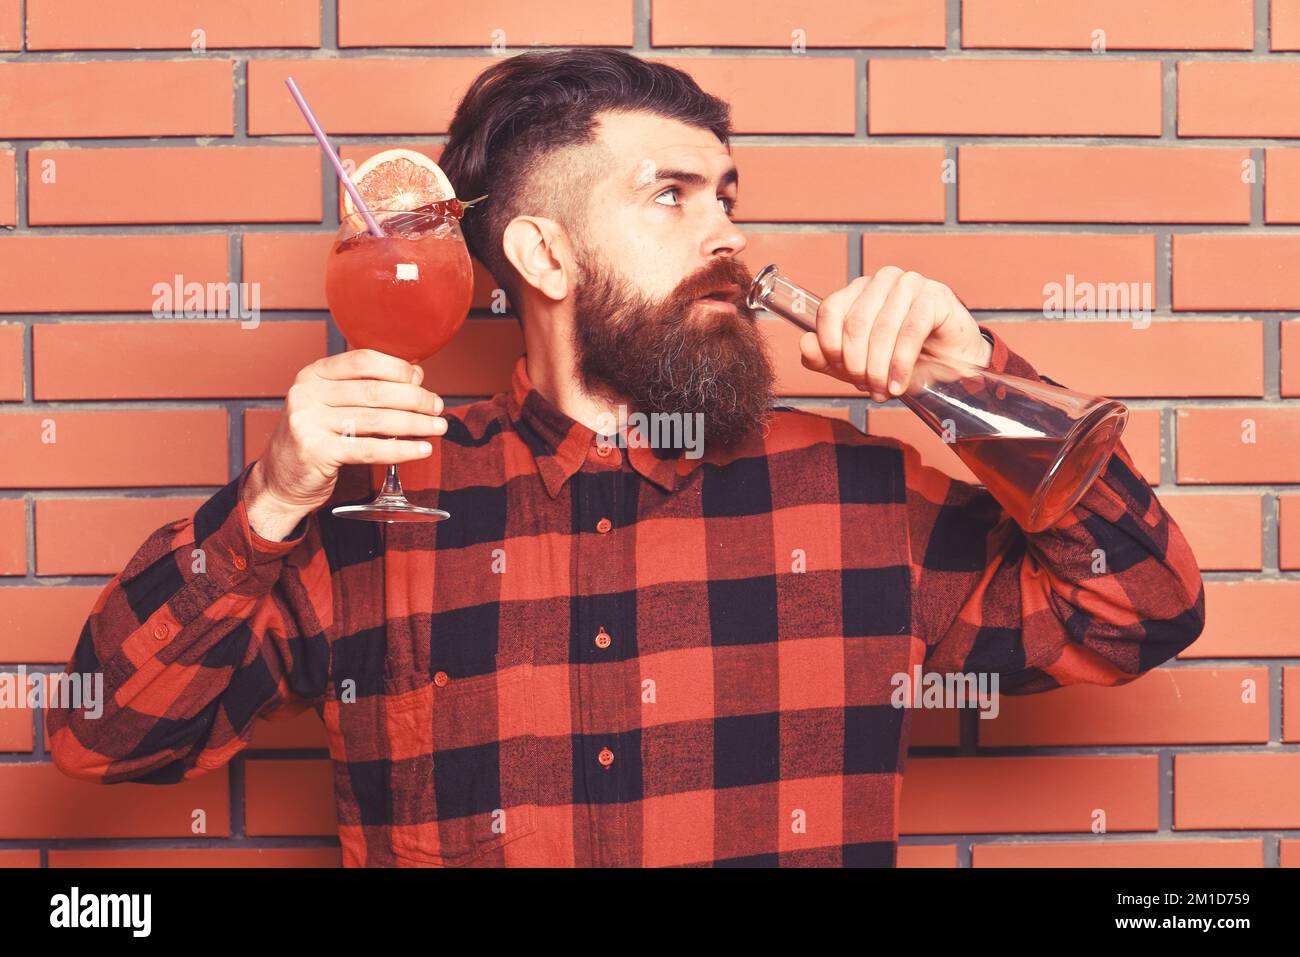 Barman with beard and strict face drinks out of bottle Stock Photo